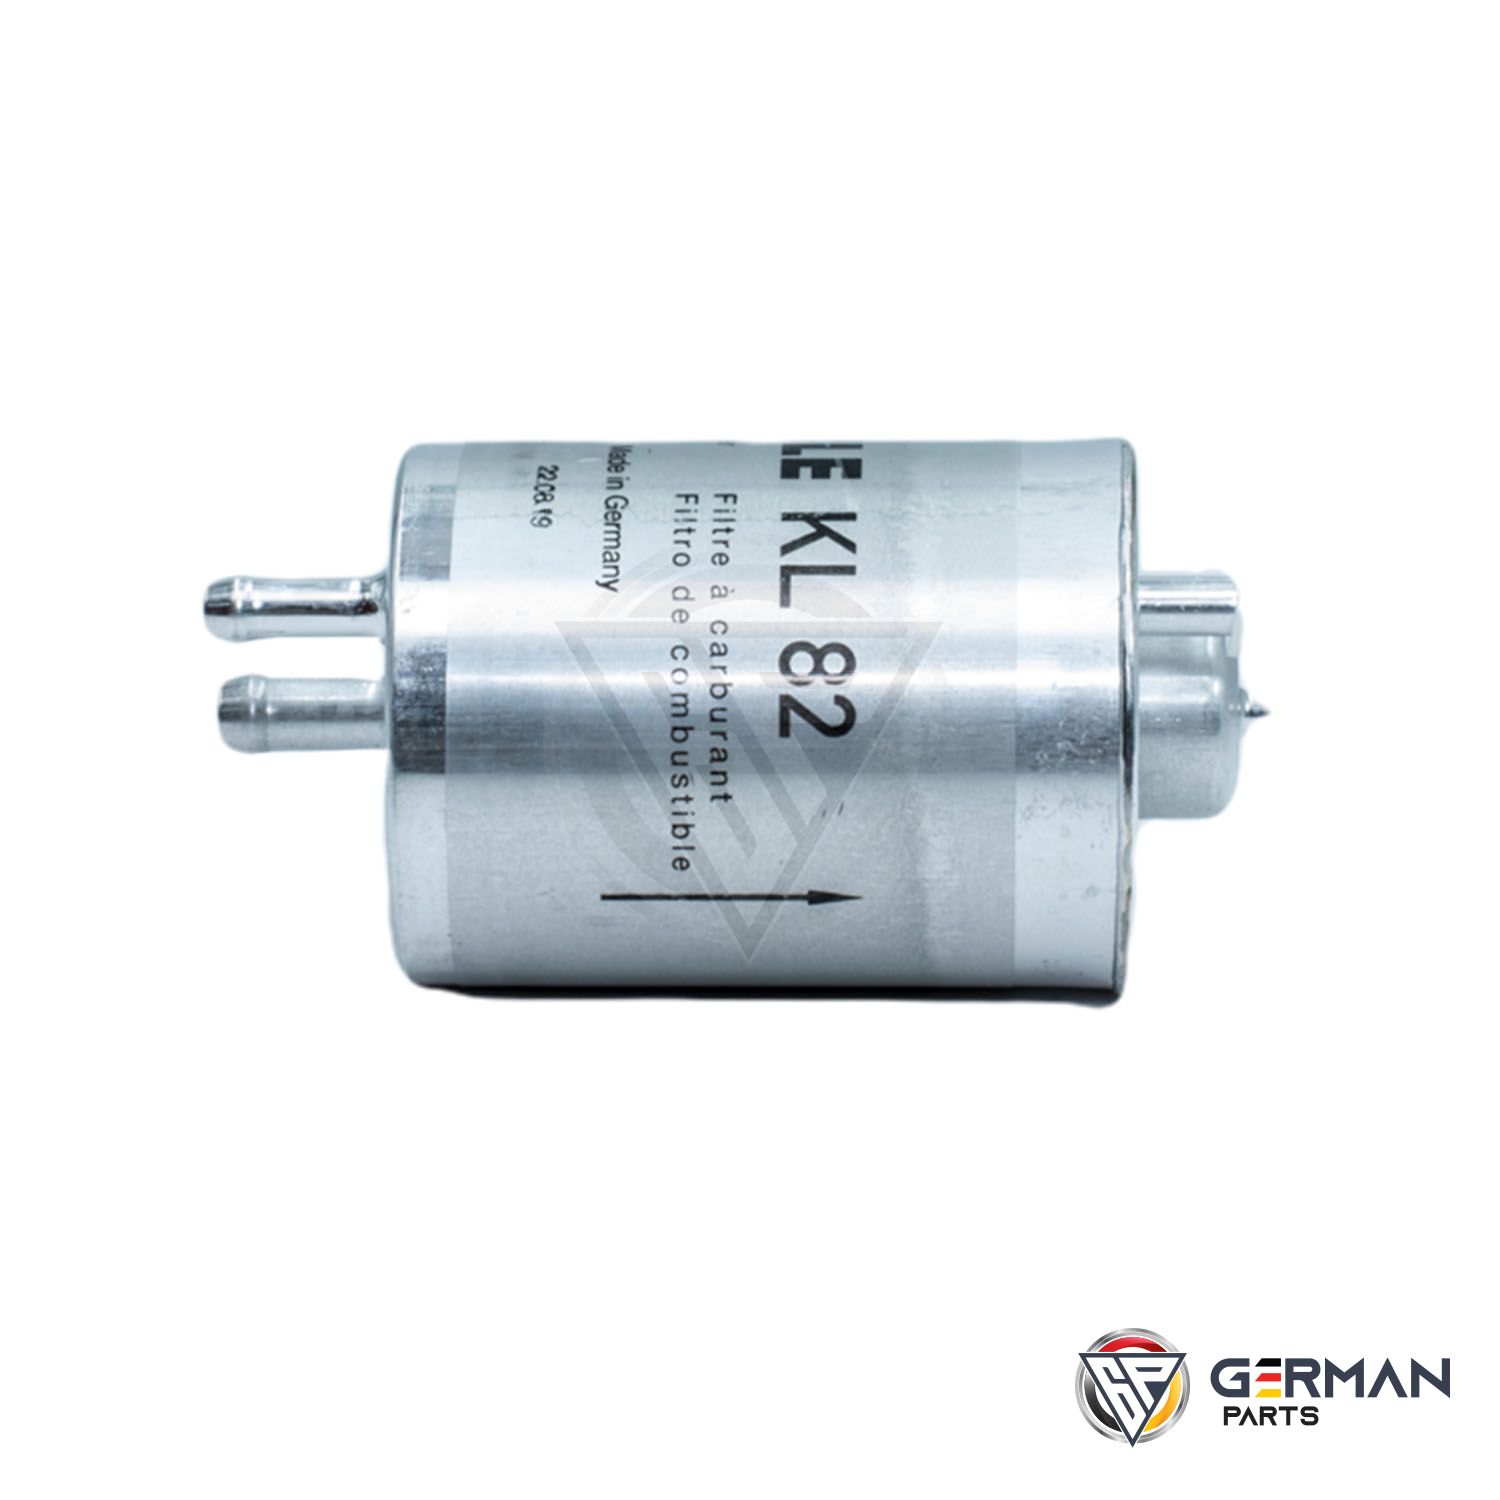 Buy Mahle Fuel Filter 0024773001 - German Parts